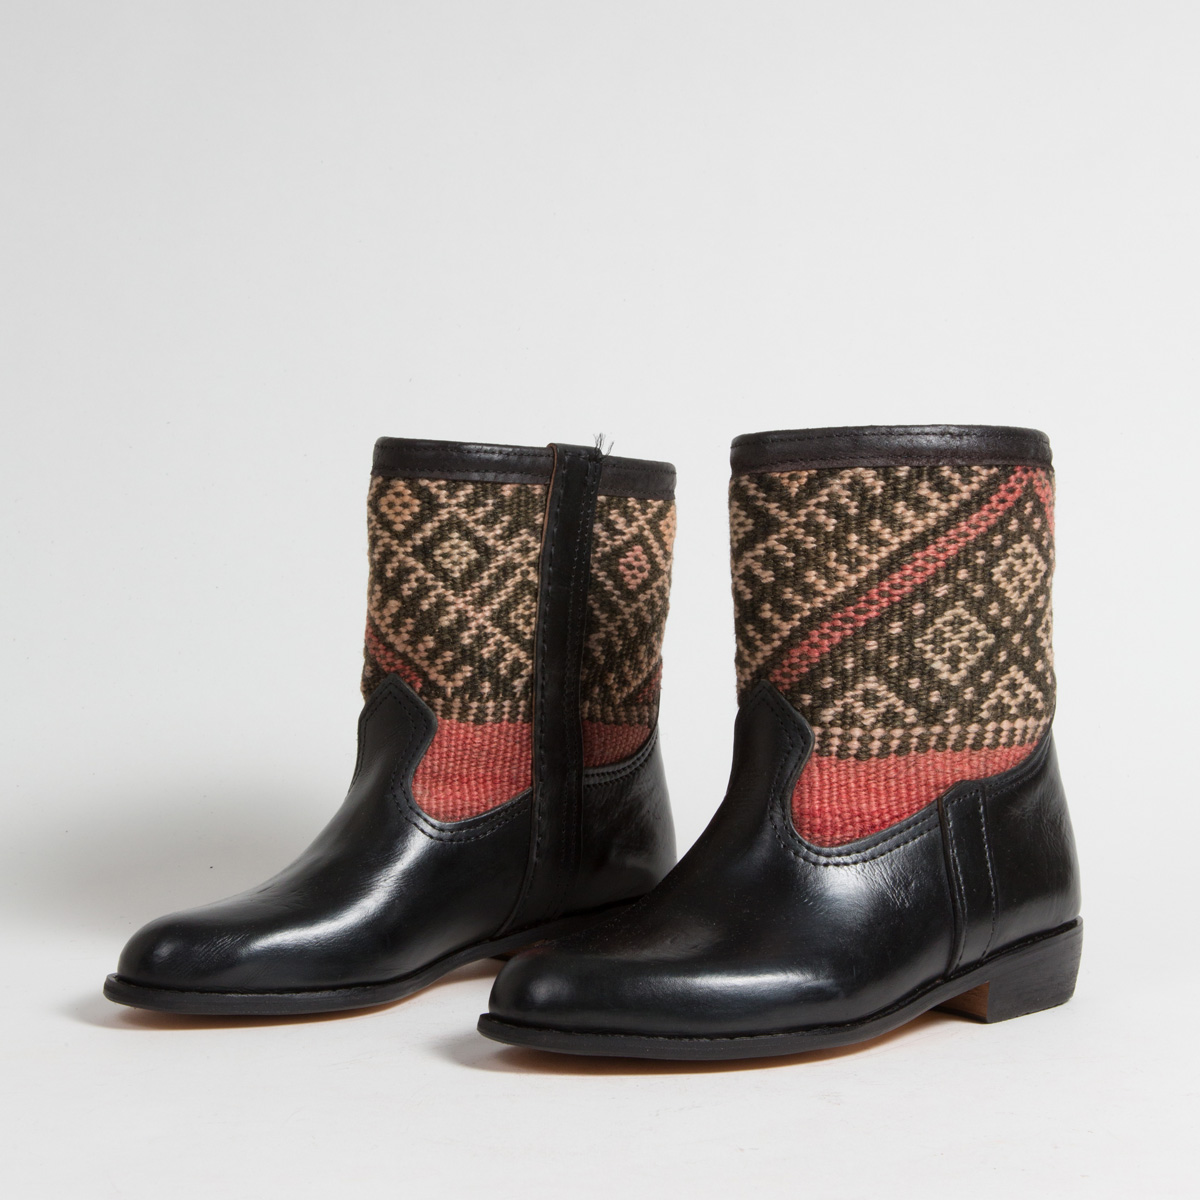 Bottines Kilim cuir mababouche artisanales (Réf. RPN8-38)